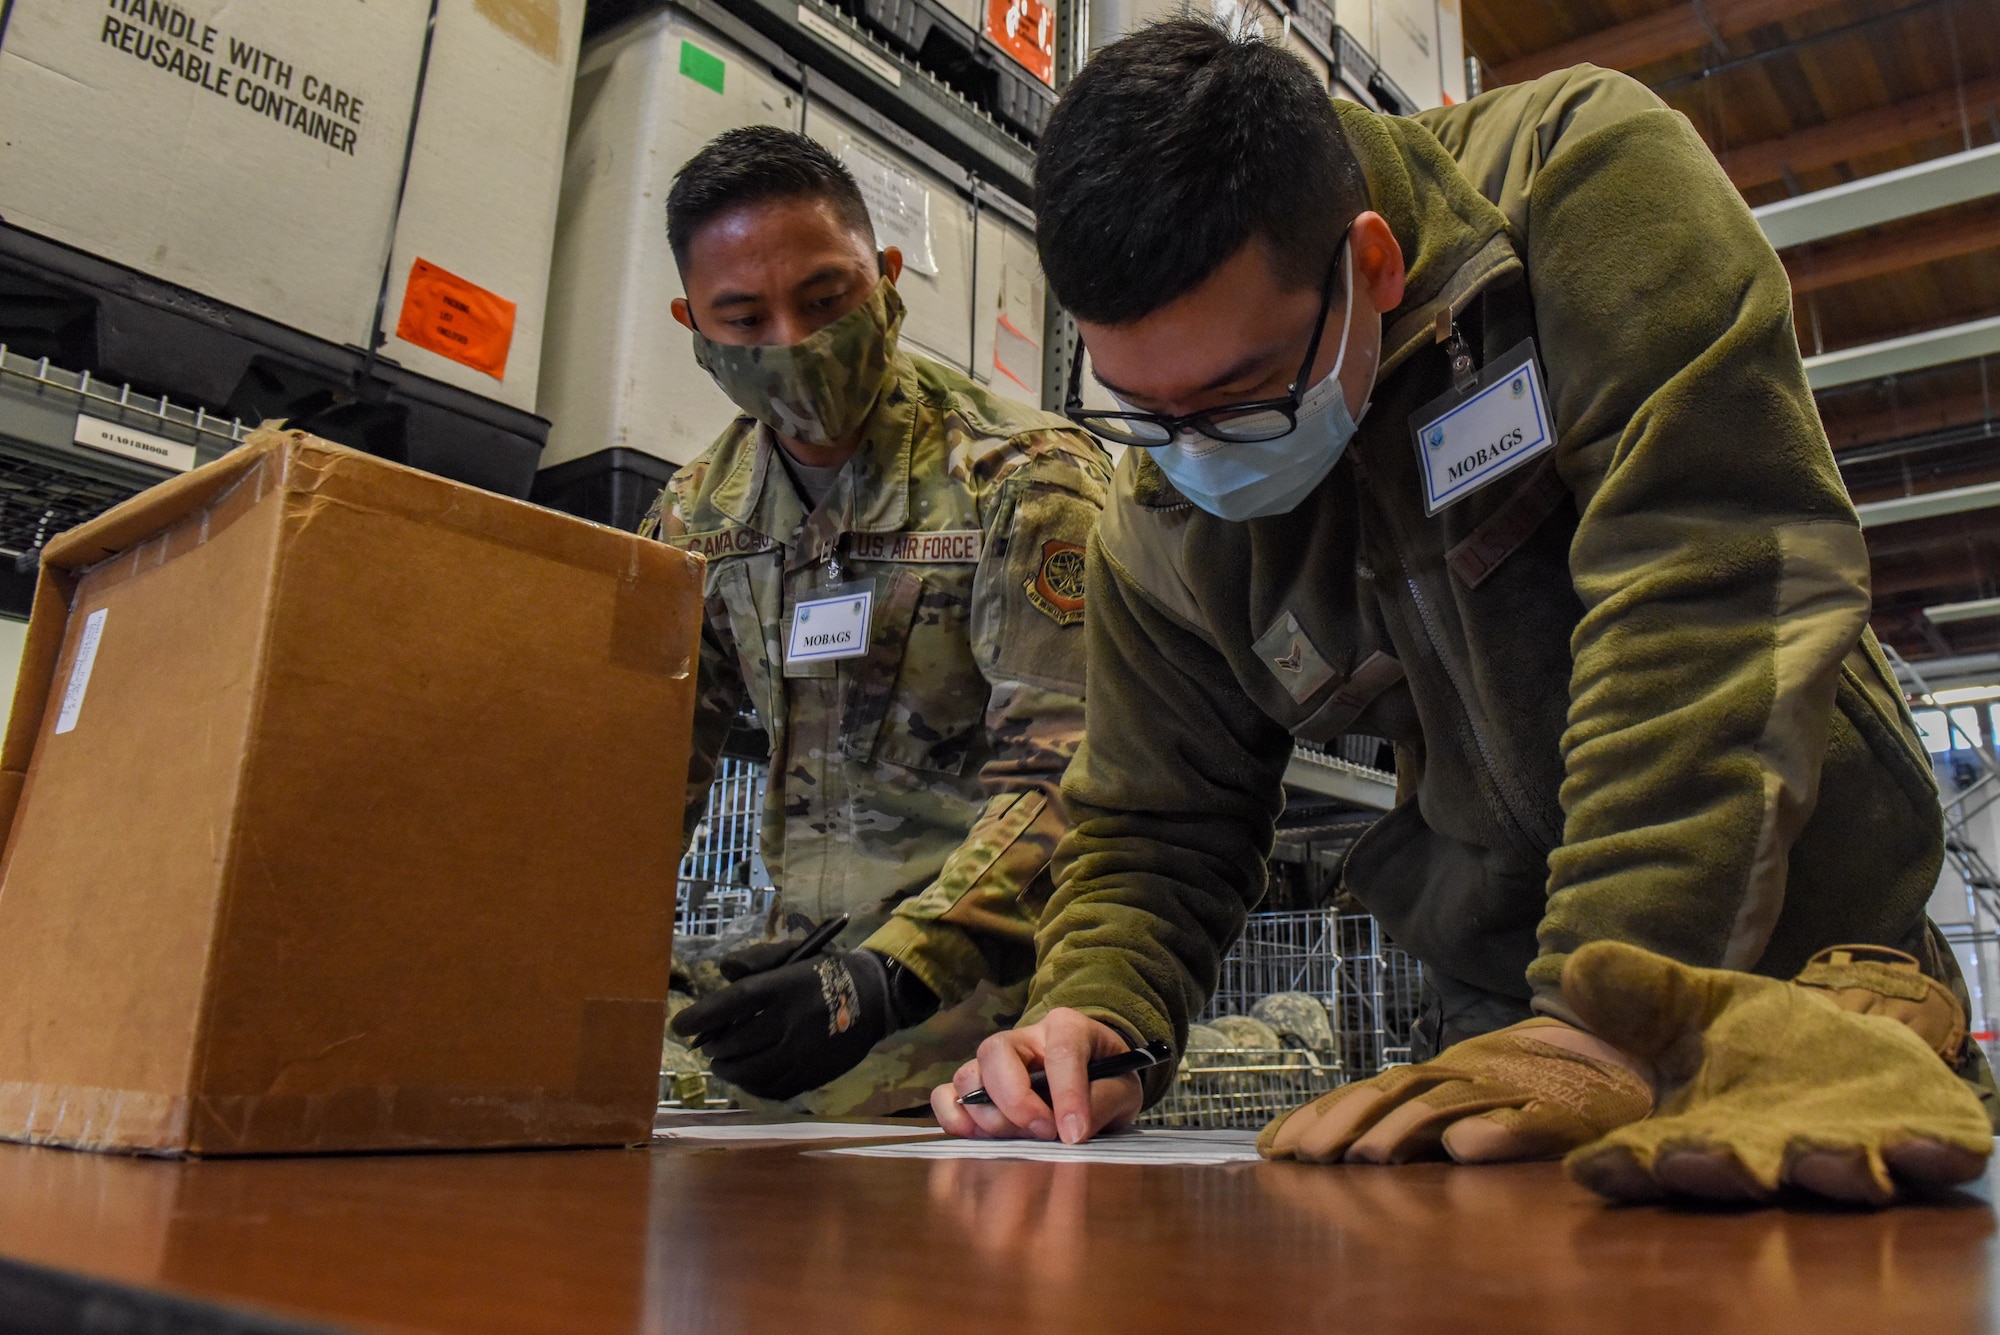 U.S. Air Force Airman 1st Class Toby Yi, and U.S. Air Force Senior Airman Isaiah Camacho, material management Airmen with the 627th Logistics Readiness Squadron issue deployment gear as part of Exercise Rainer War at Joint Base Lewis-McChord, Washington, April 20, 2021. Exercise Rainier War tests the 62nd Airlift Wing’s capability to plan, generate and execute a deployment tasking, sustain contingency operations, demonstrate full spectrum readiness while in a contested, degraded and operationally limited environment. (U.S. Air Force photo by Airman Charles Casner)